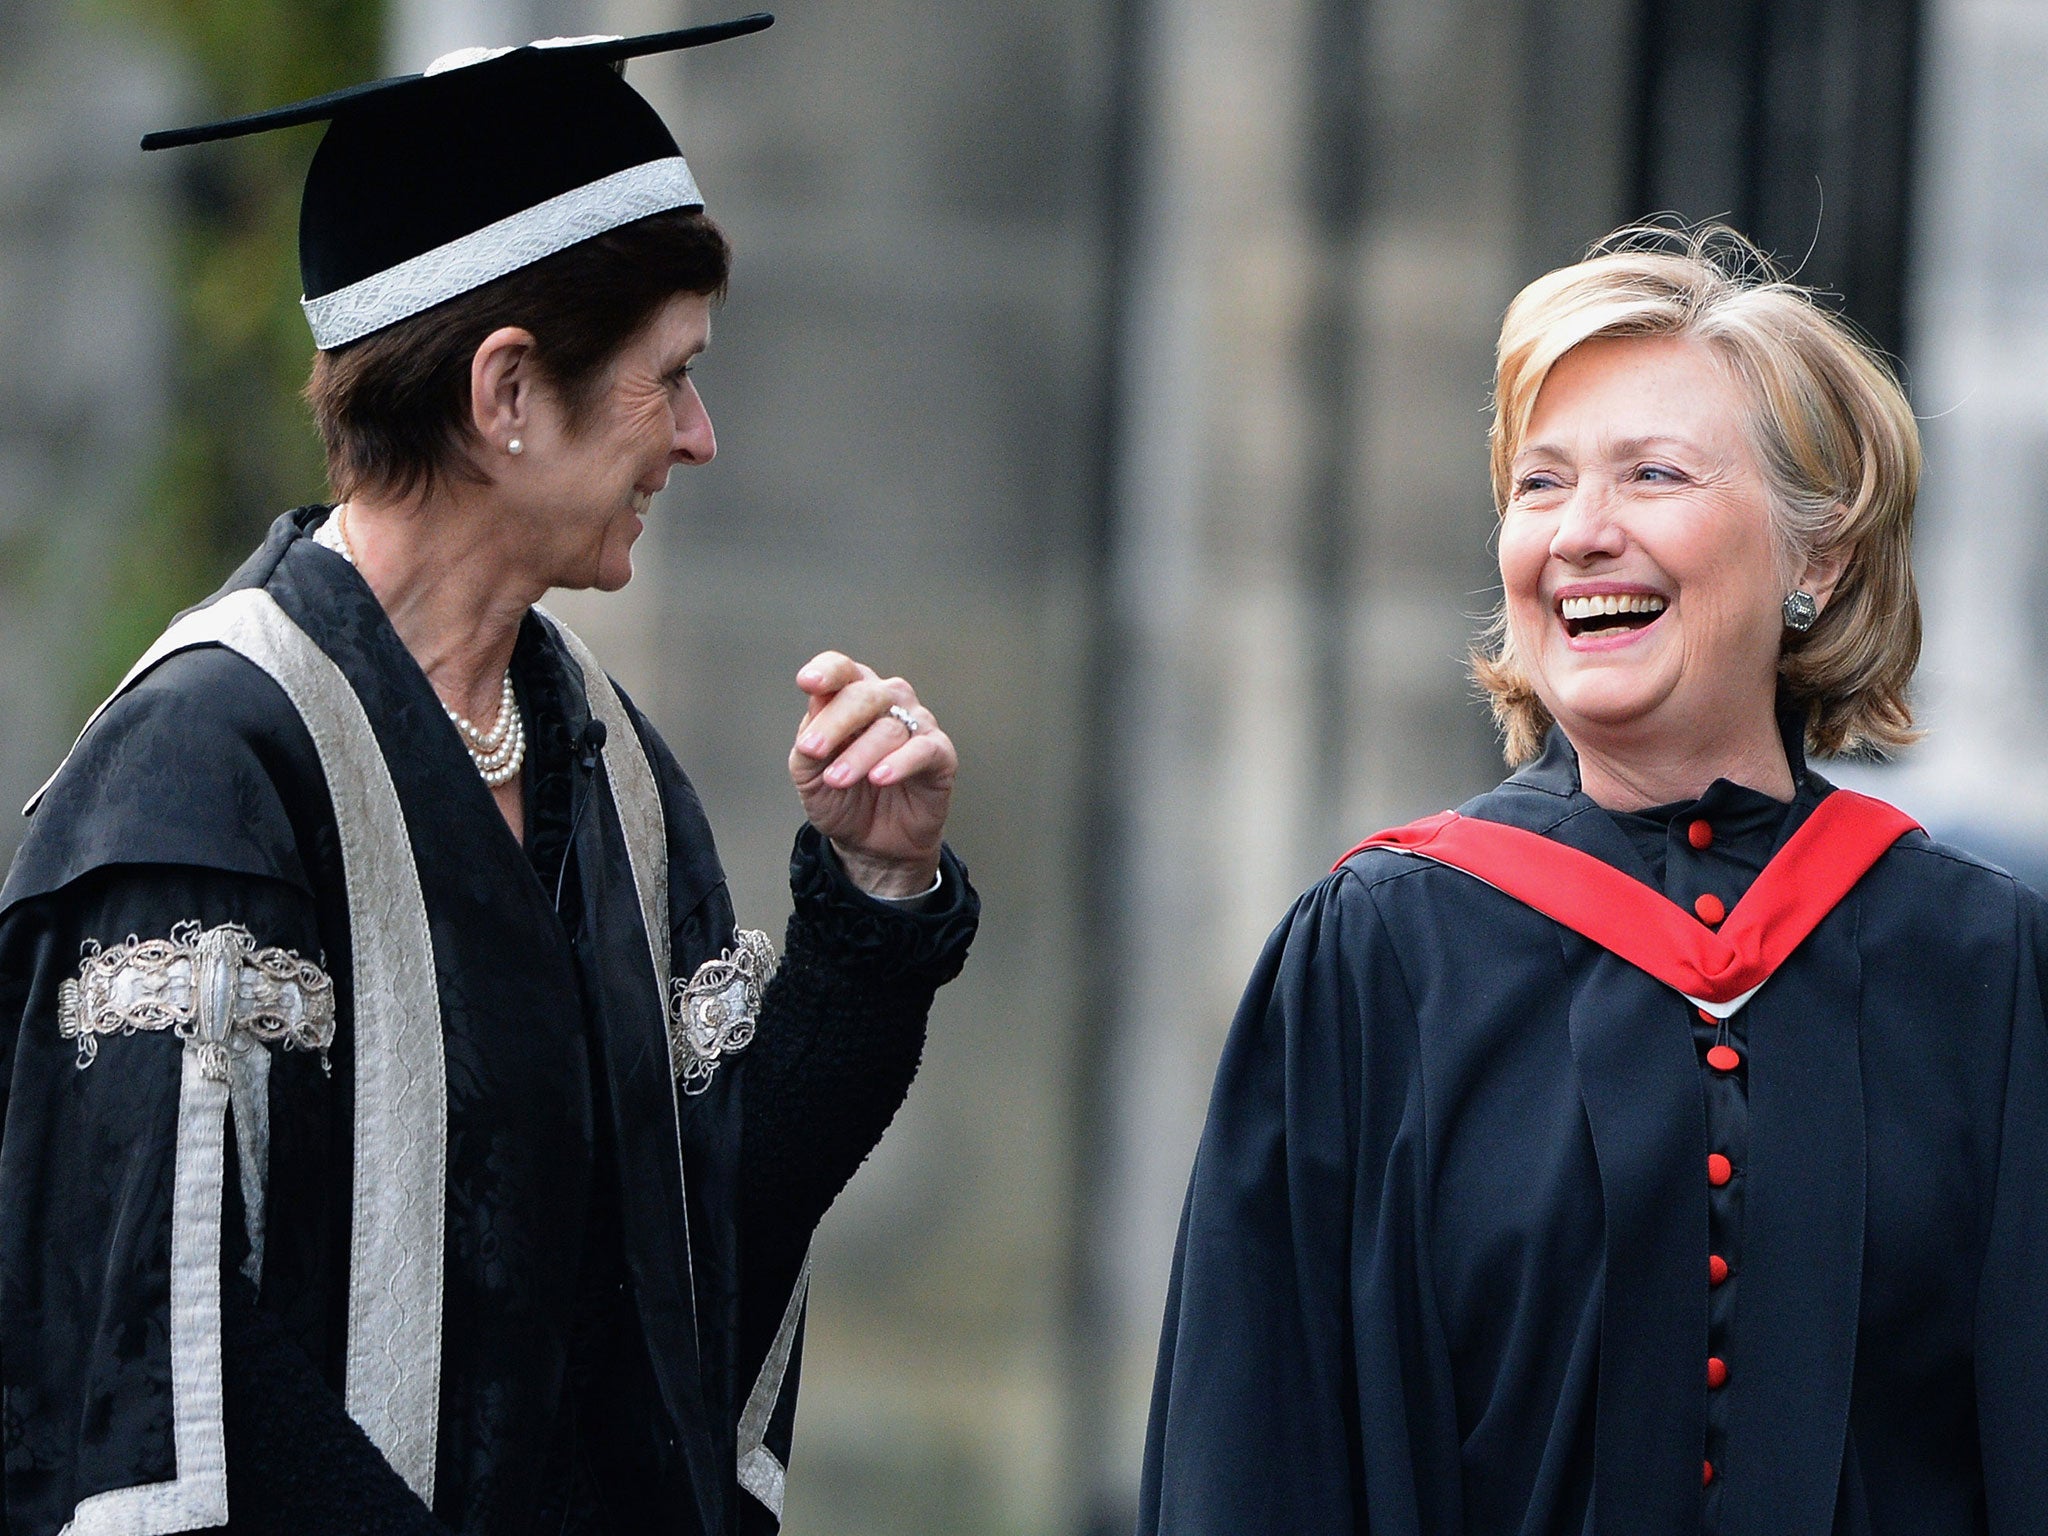 Professor Louise Richardson with Hillary Clinton at St Andrews in 2013